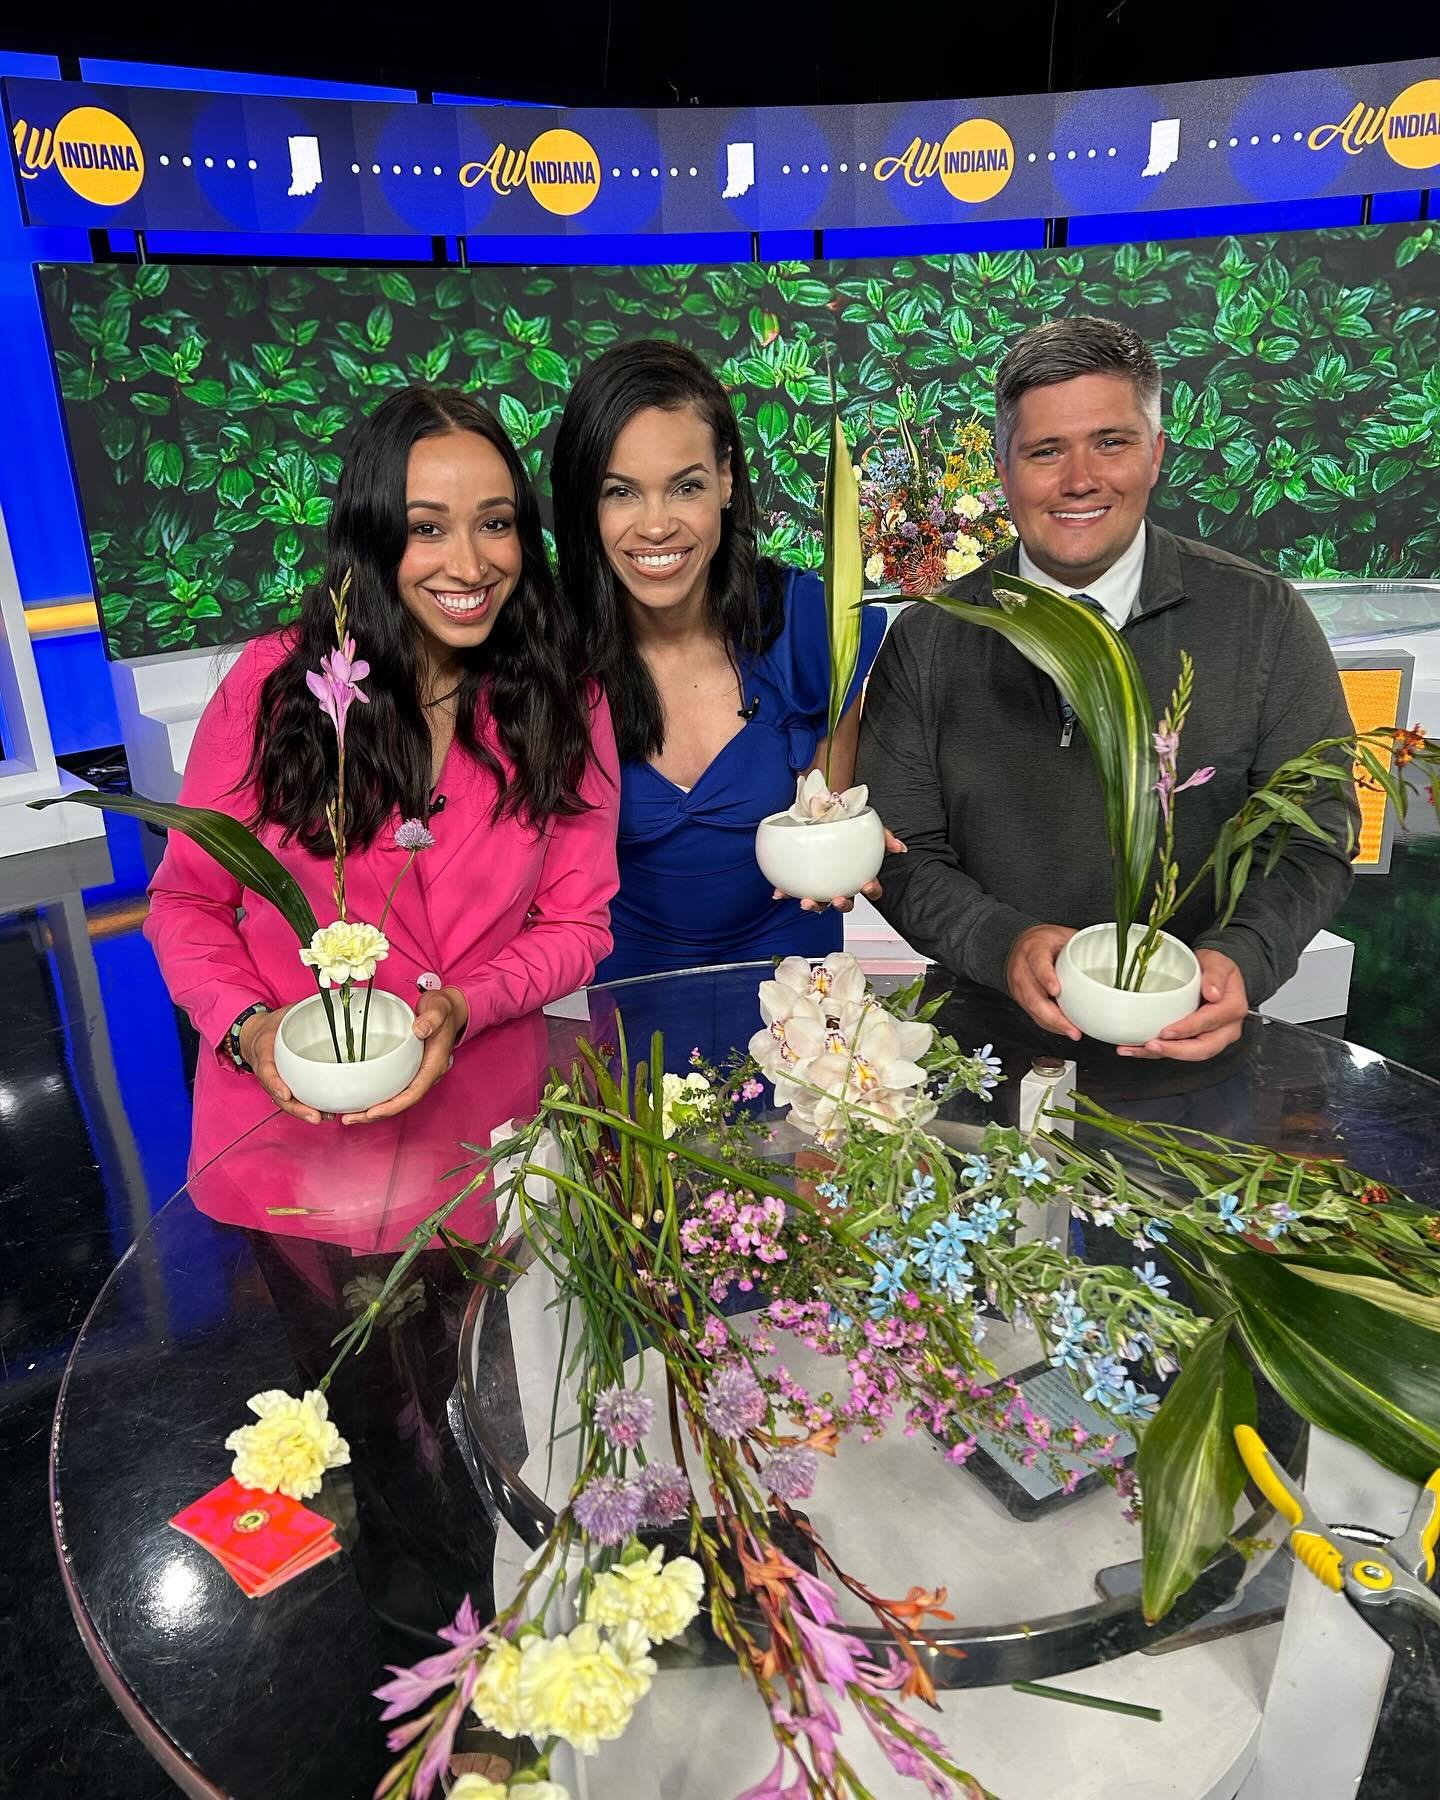 @wishtv8 today!!! Thank you to @polishedcomms for connecting us!!! If you don&rsquo;t know, @polishedcomms is the best of the best comms firm in the world. Thank you  @caseyncawthon and thank you @wishtv8! Flores from @welchwholesale this🥰🥰😍😍

#t